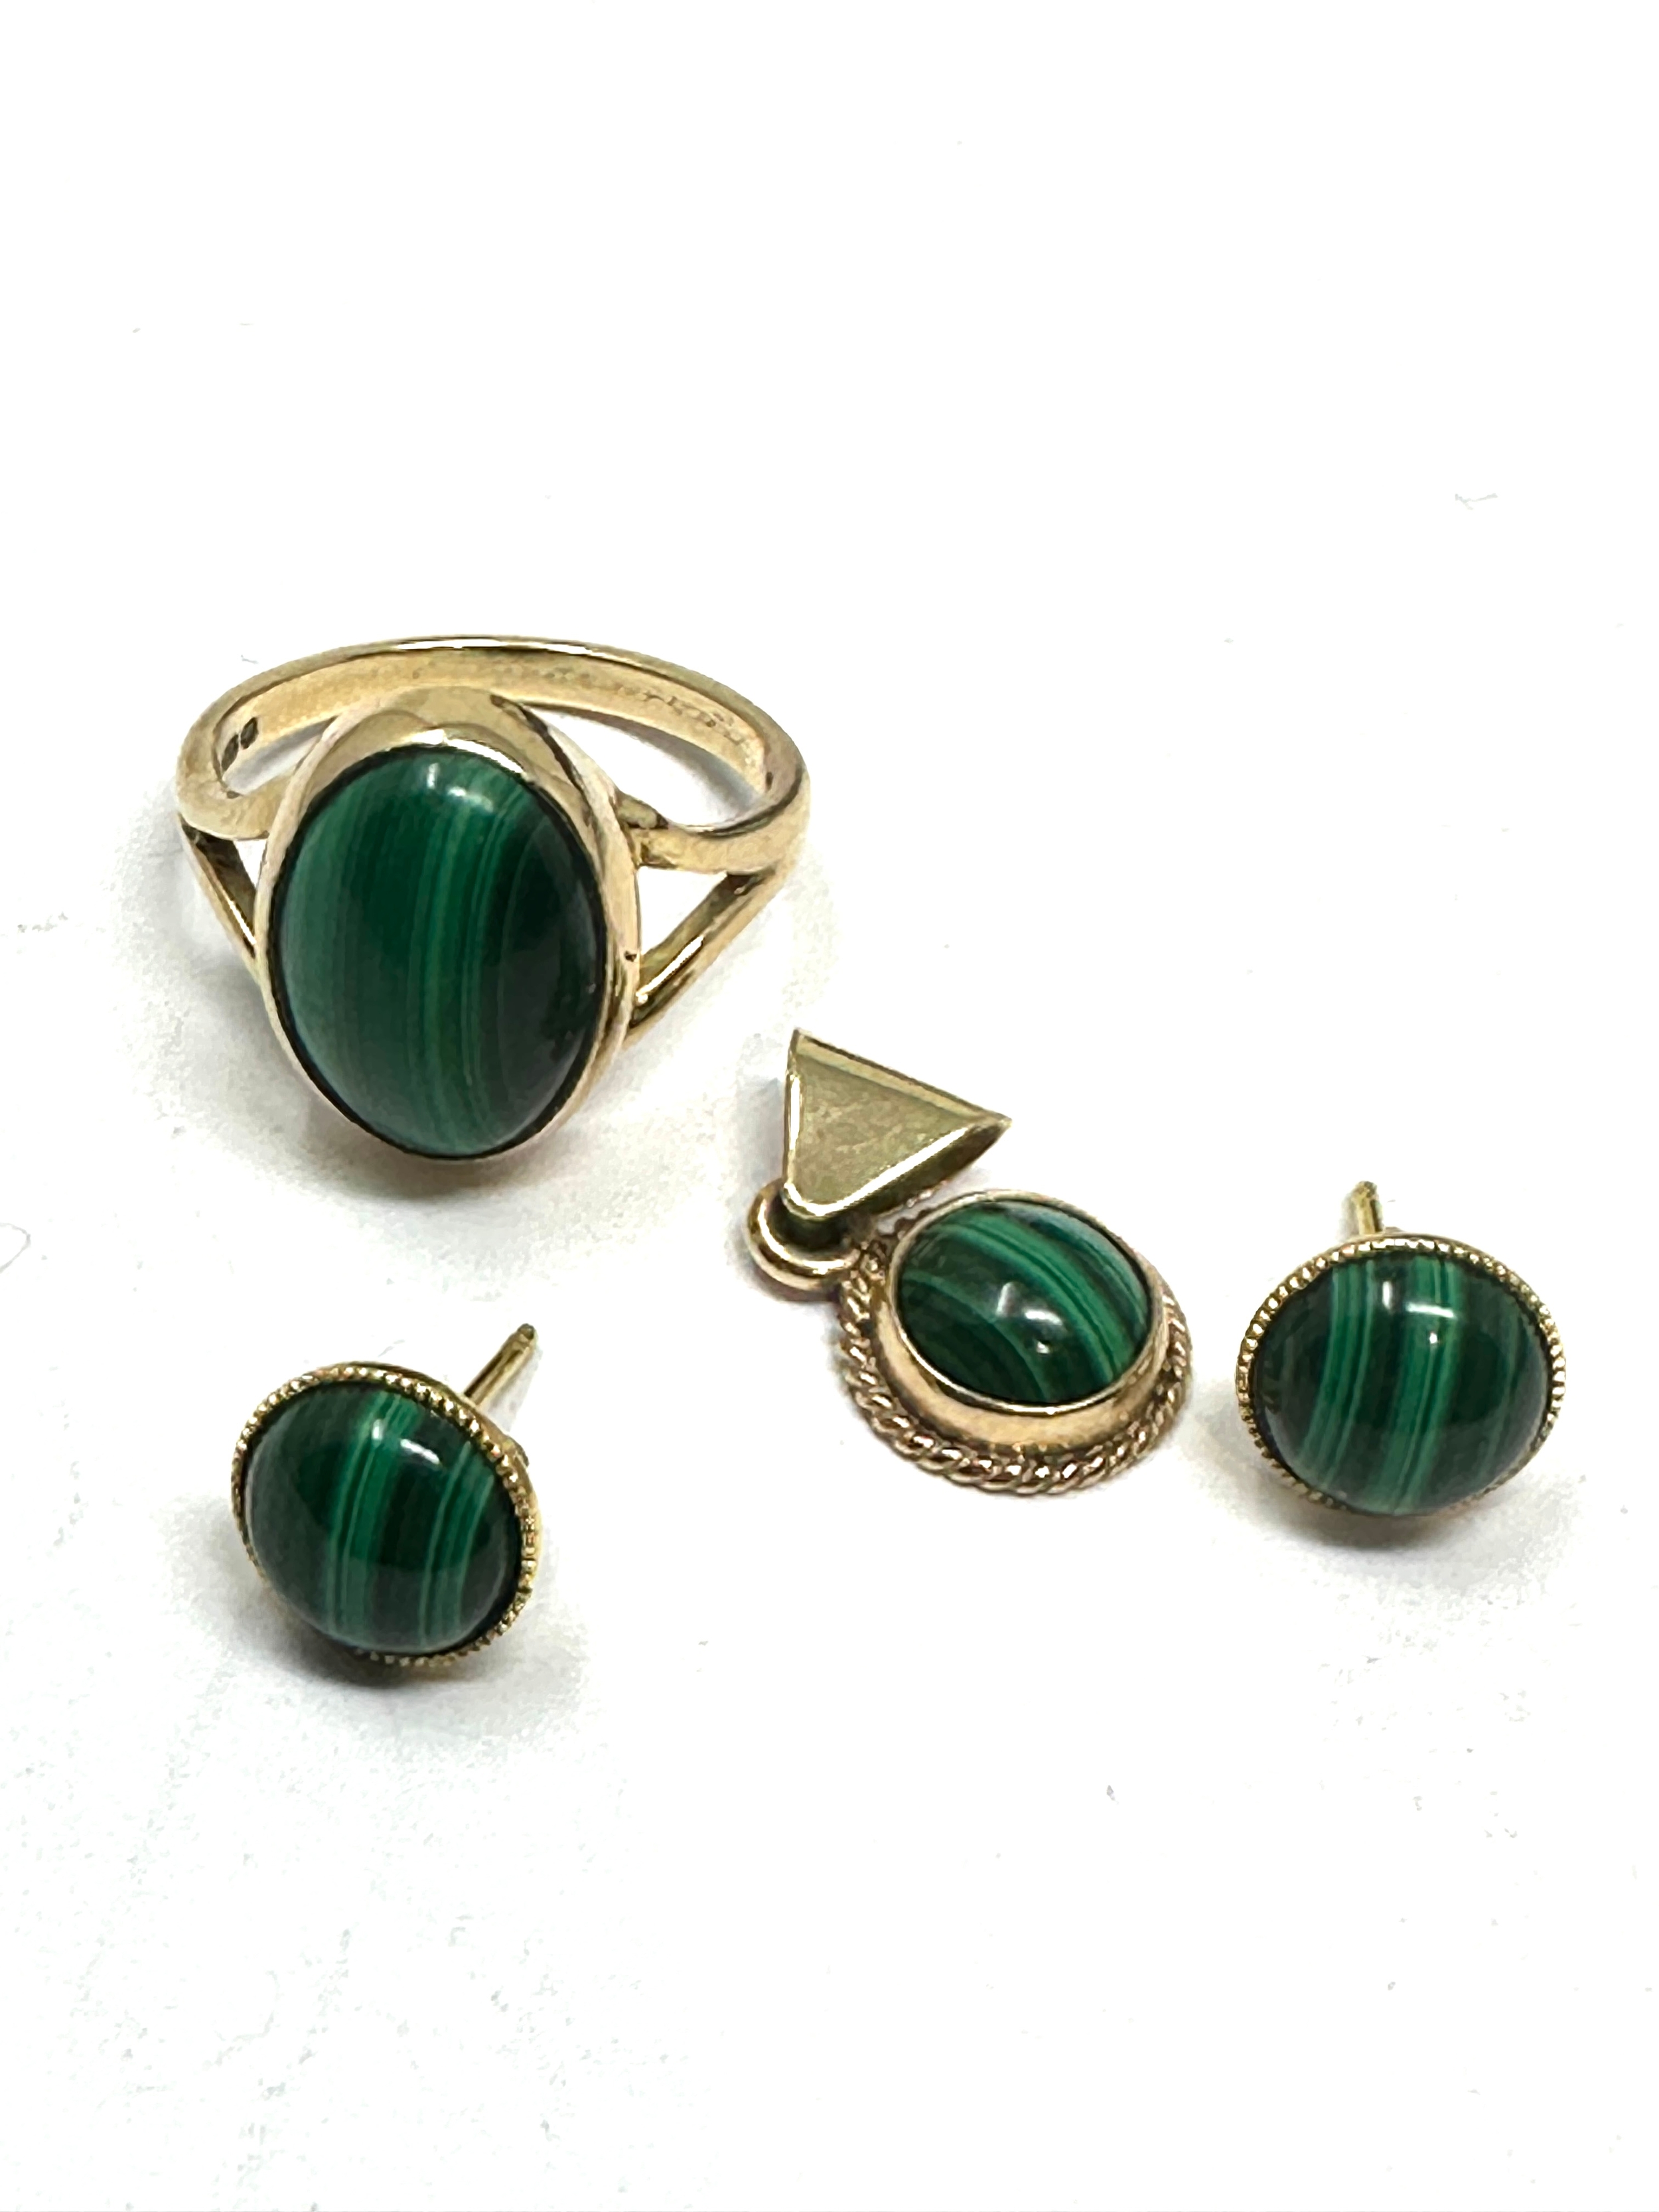 9ct gold malachite ring pendant & earrings weight 7.6g